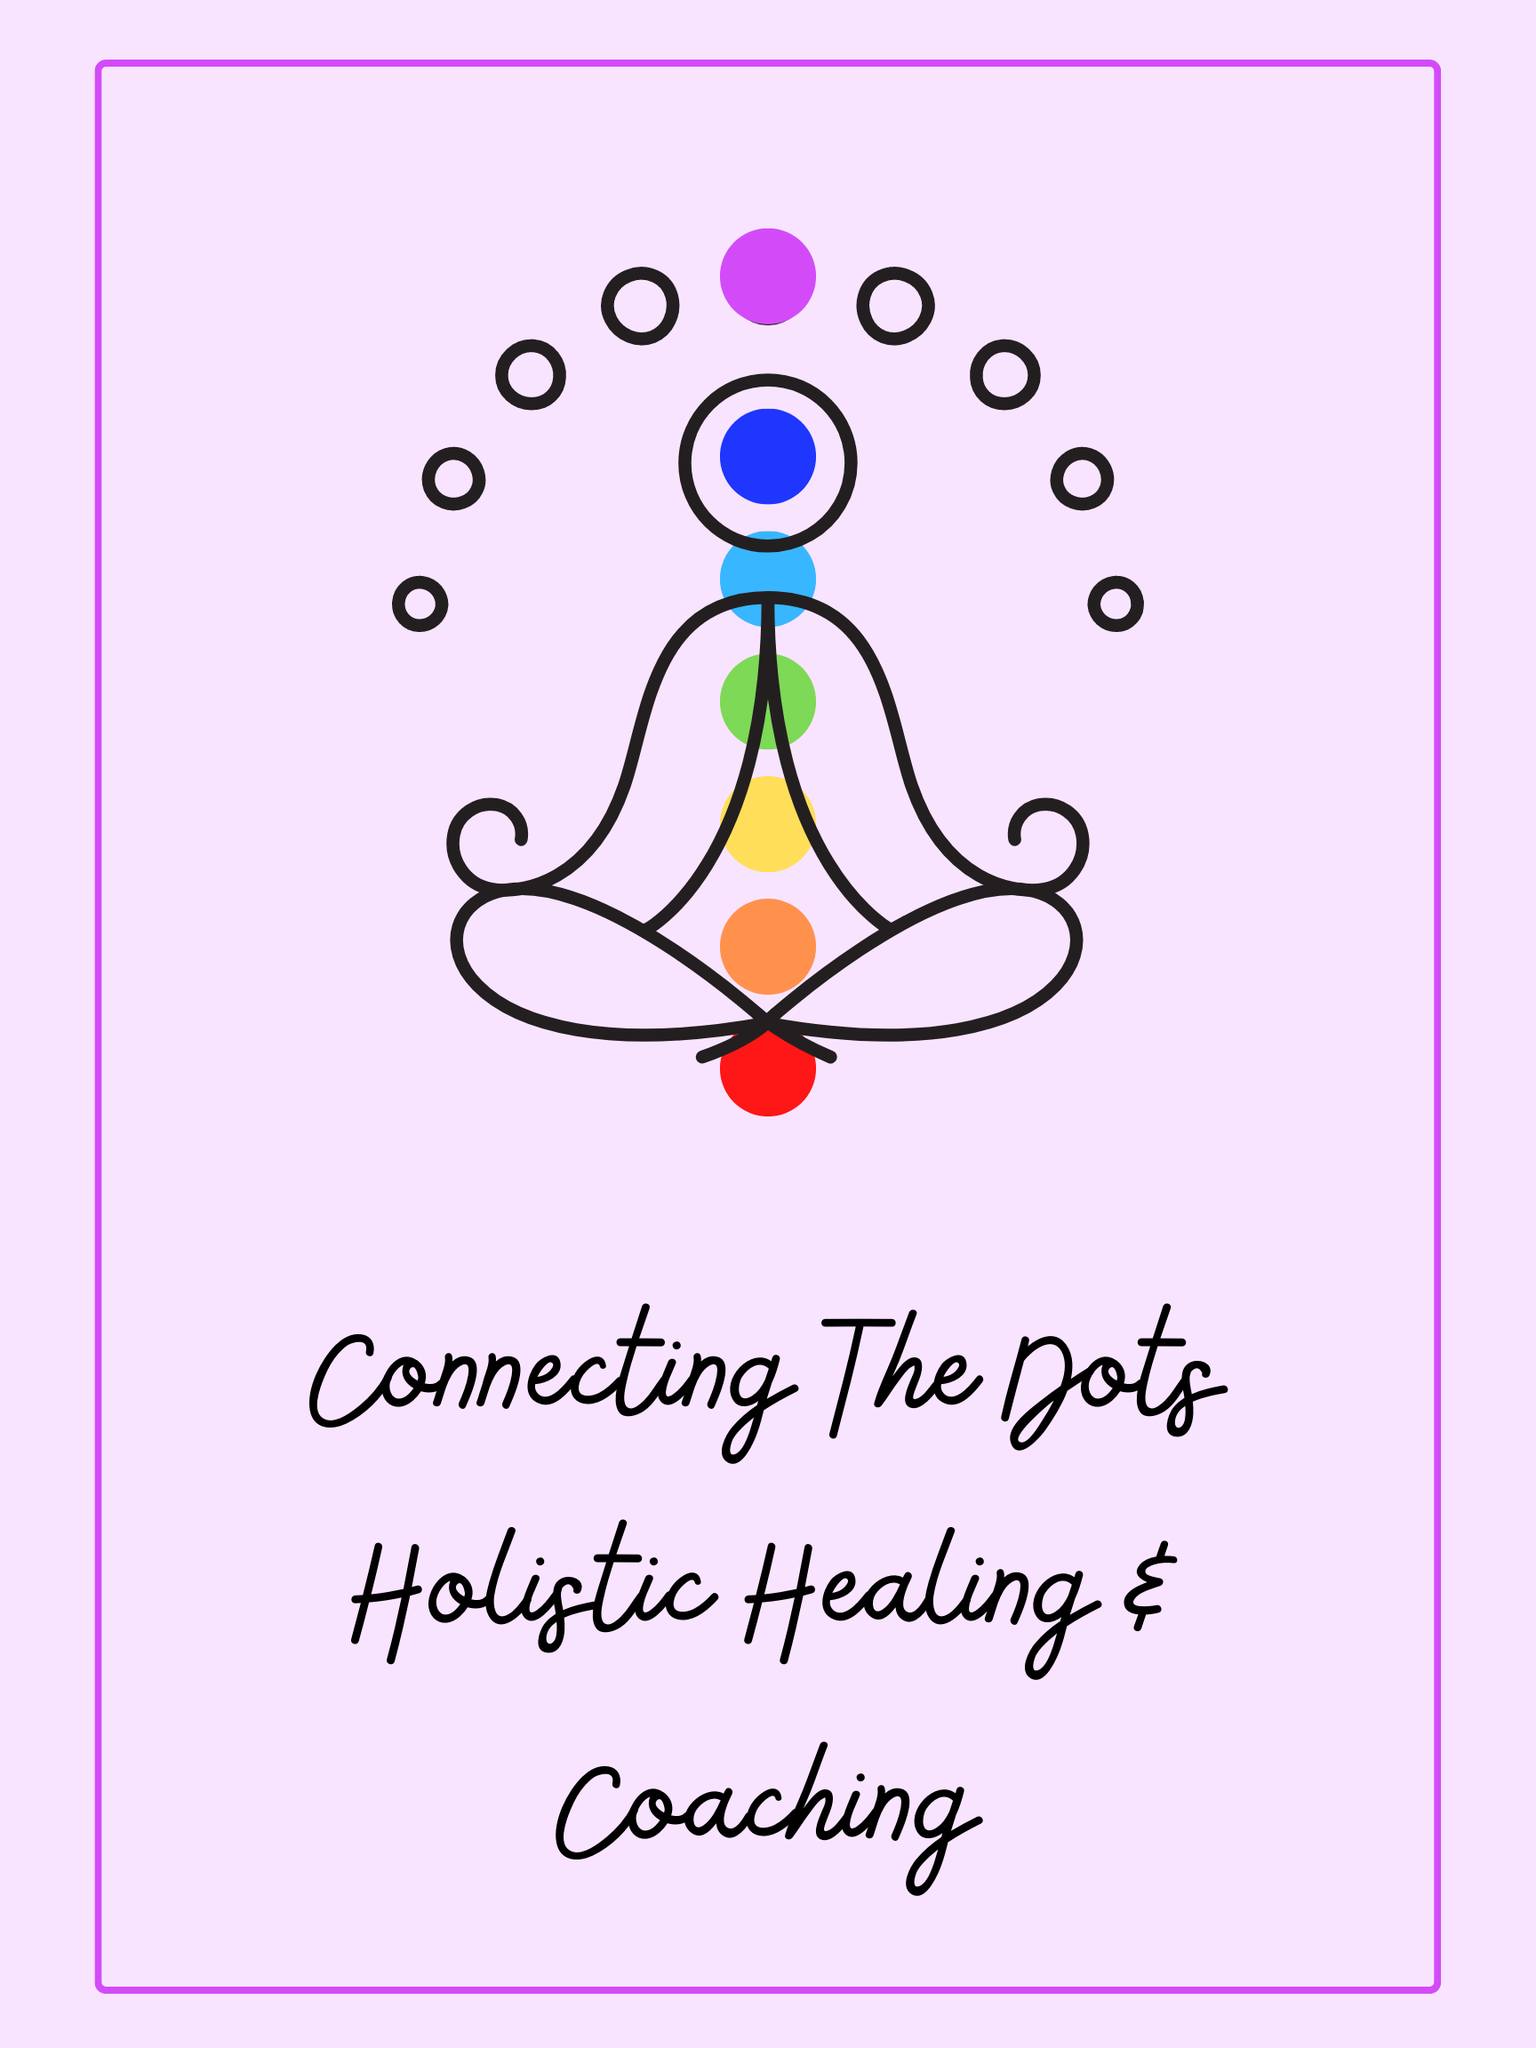 Connecting The Dots Holistic Healing and Coaching